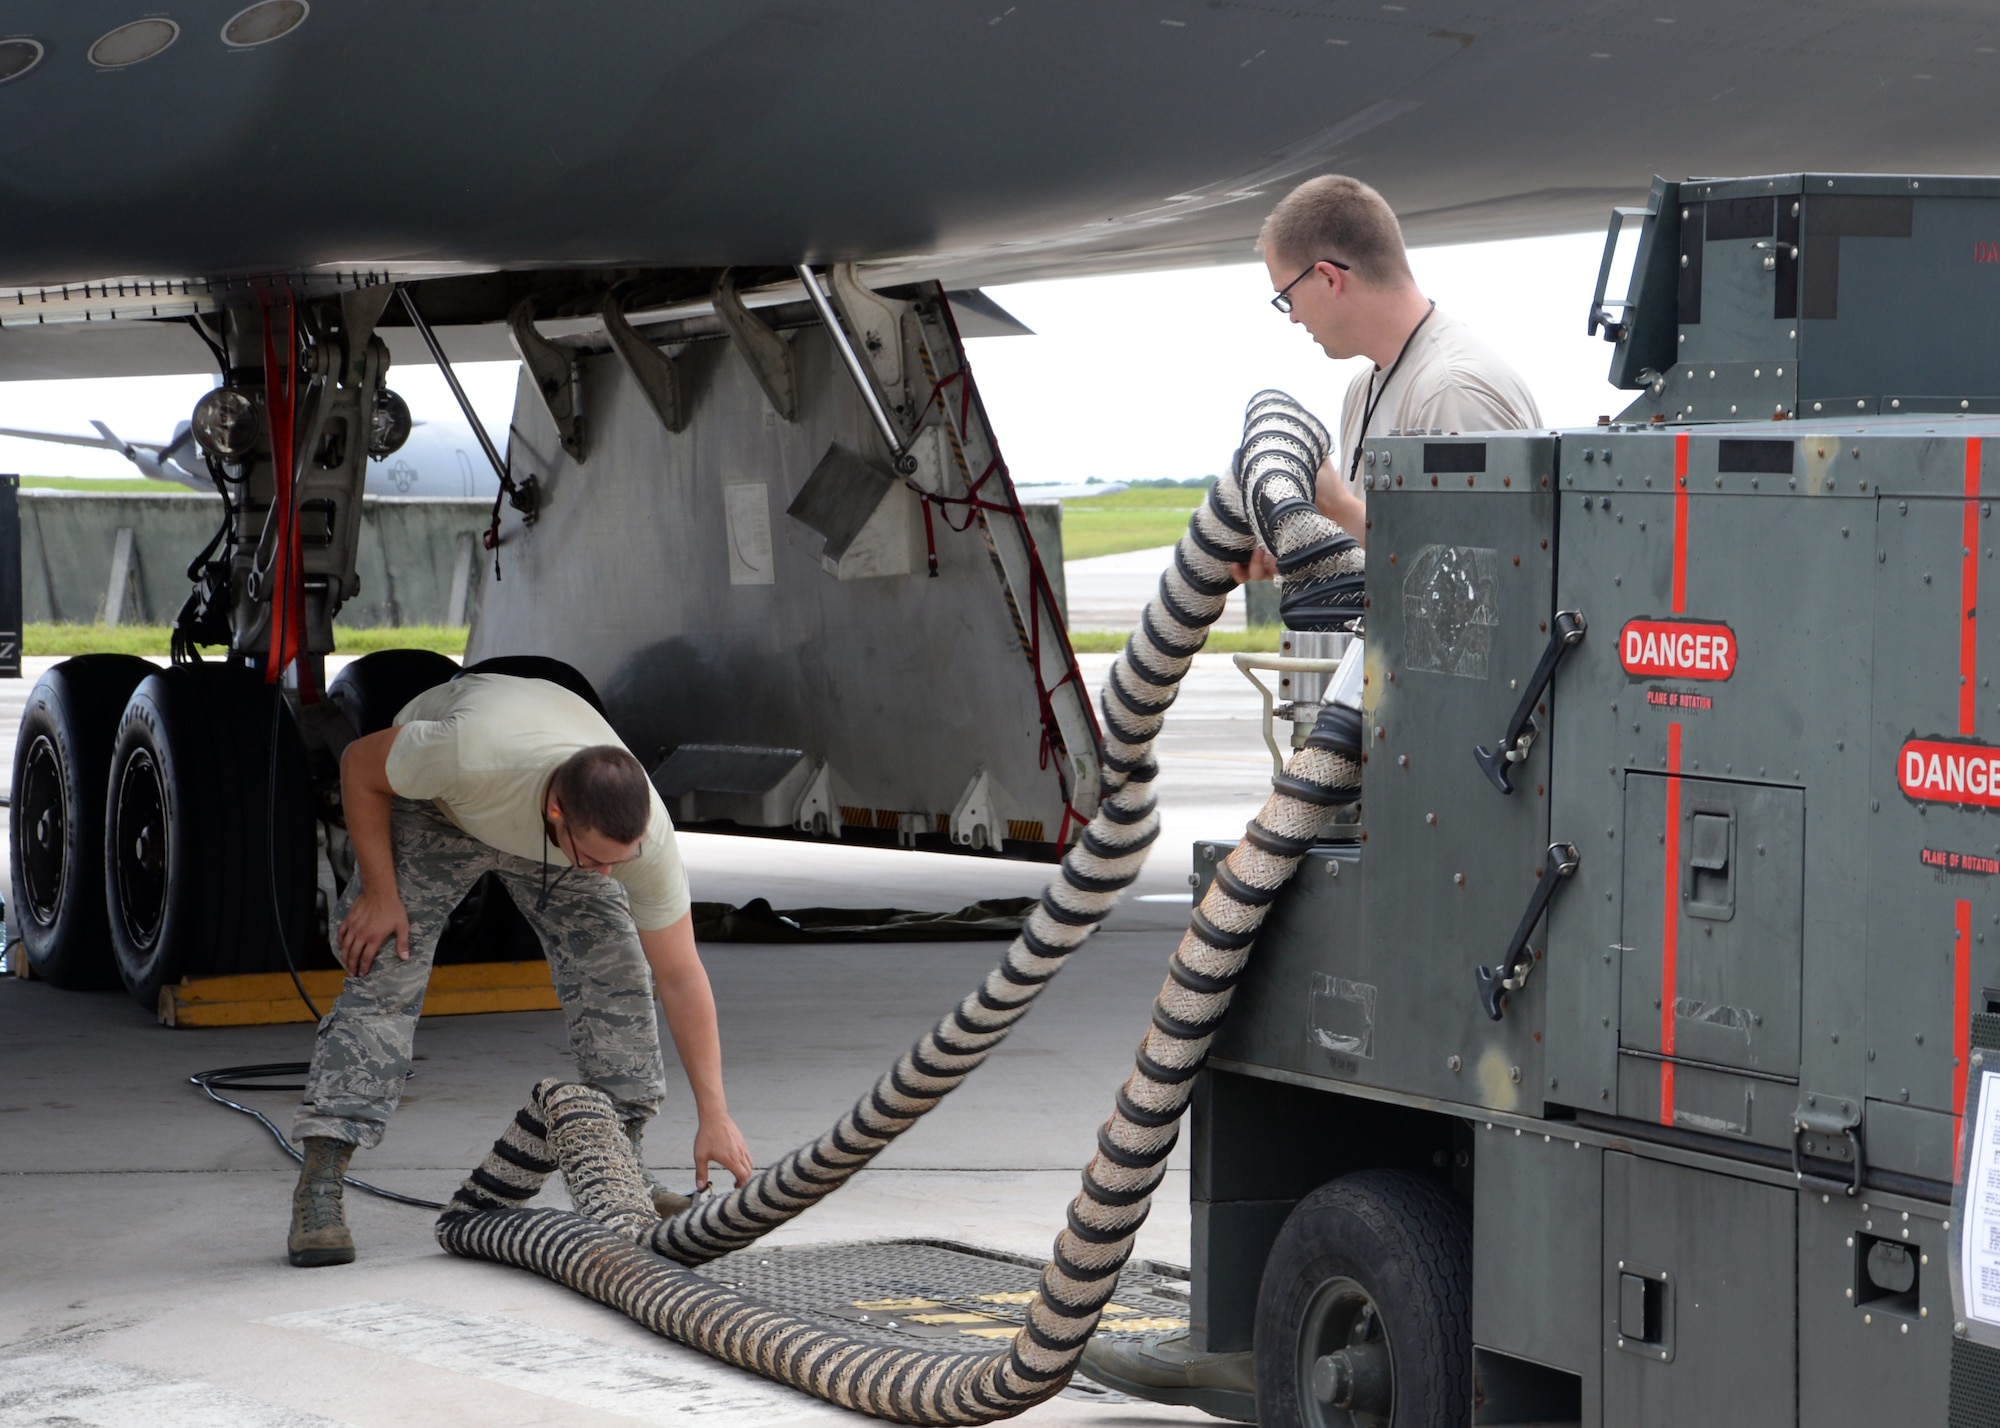 Airmen from the 509th Aircraft Maintenance Squadron work on a B-2 Spirit bomber during a deployment, Andersen Air Force Base, Guam, Aug. 22, 2014.The bombers and approximately 200 support Airmen, assigned to the 509th Bomb Wing at Whiteman Air Force Base, Mo., deployed to Guam Aug. 6, 2014 to improve combat readiness and ensure regional stability.  Bomber deployments help maintain stability in the region while allowing units to become familiar with operating in the theater according to USPACOM.  (U.S. Air Force photo by Senior Airman Cierra Presentado/Released)